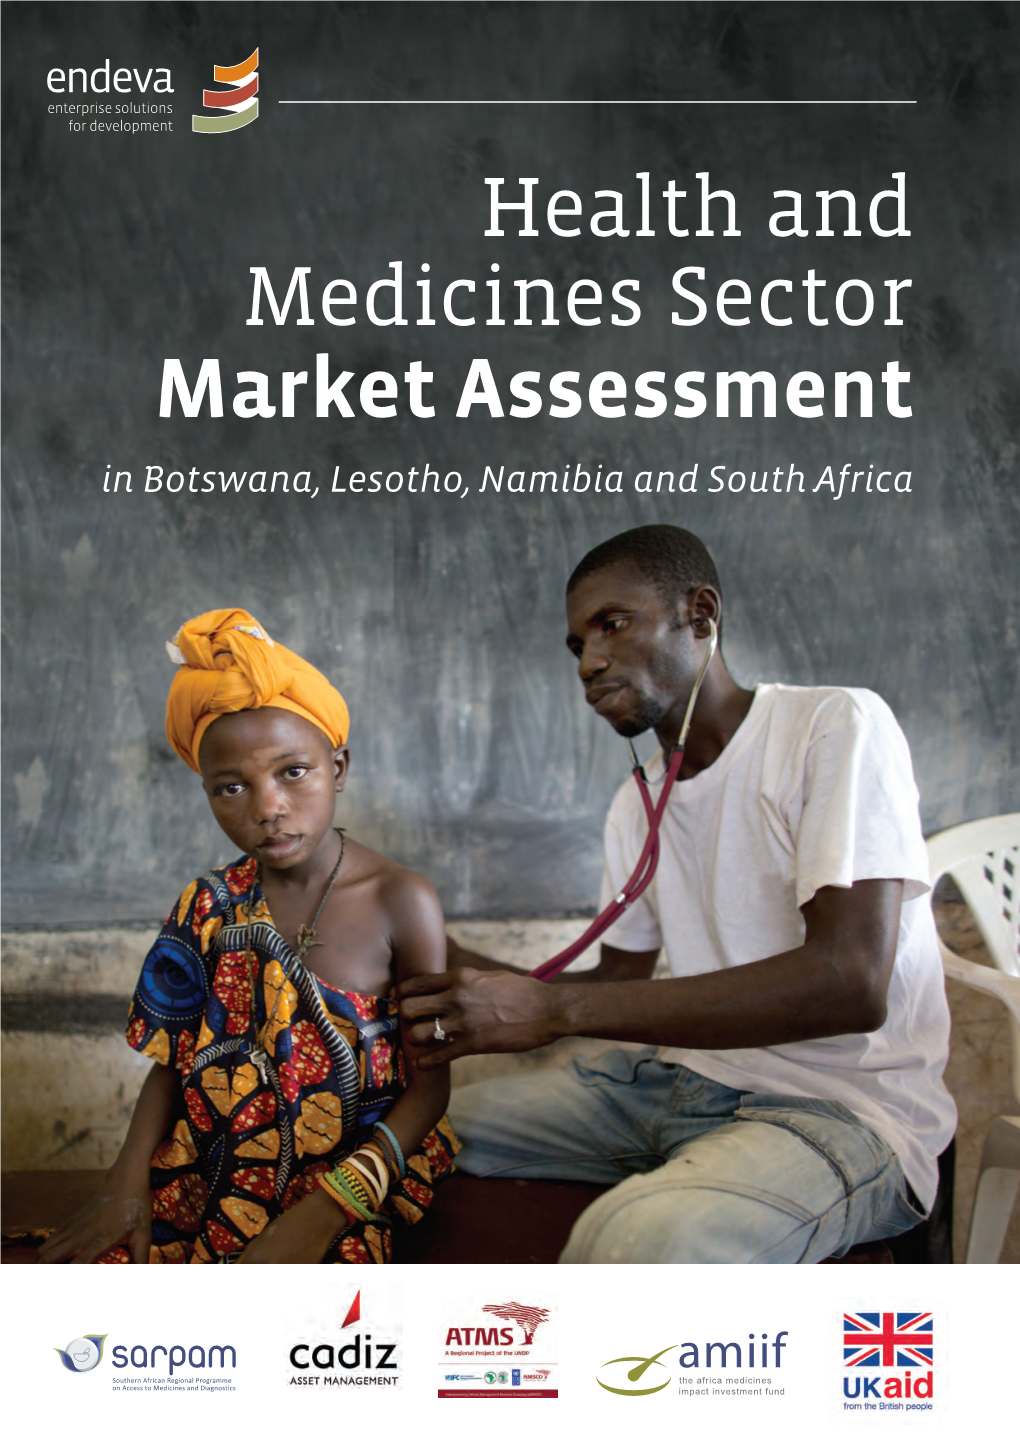 Health and Medicines Sector Market Assessment in Botswana, Lesotho, Namibia and South Africa